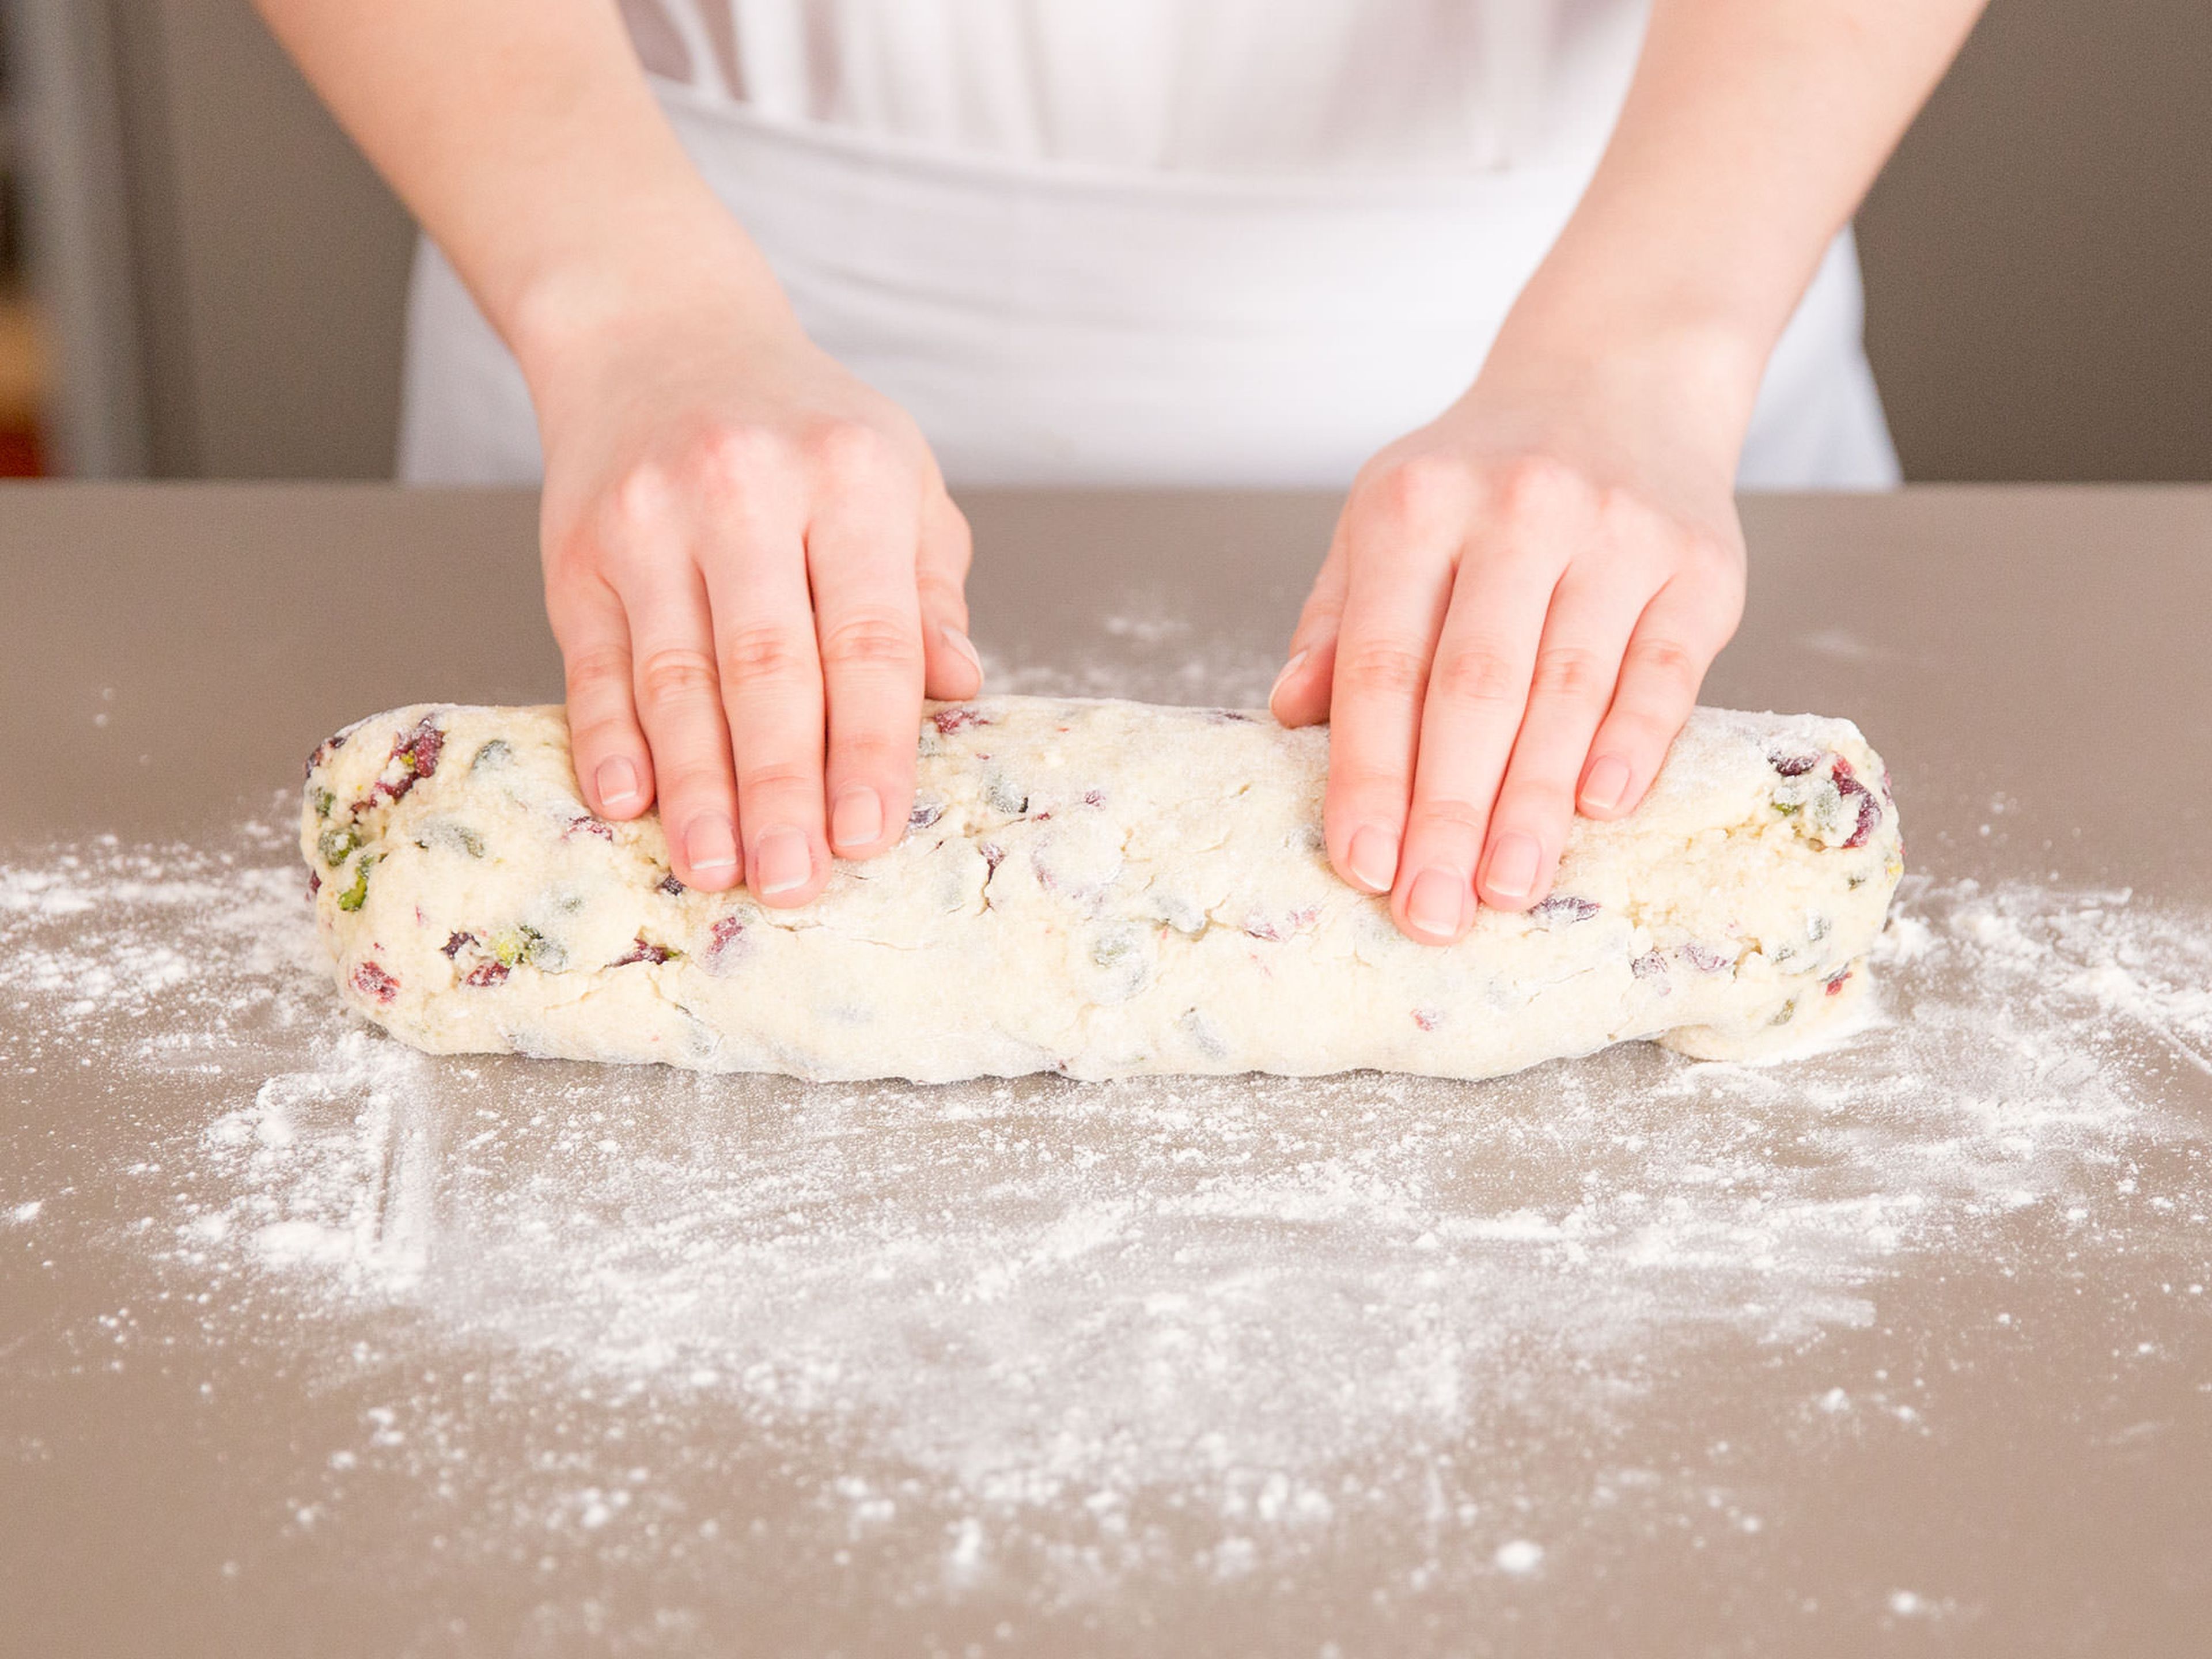 Next, roll the dough into a log. Press the dough tightly together, as it can be quite crumbly due to the cranberries and pistachios.